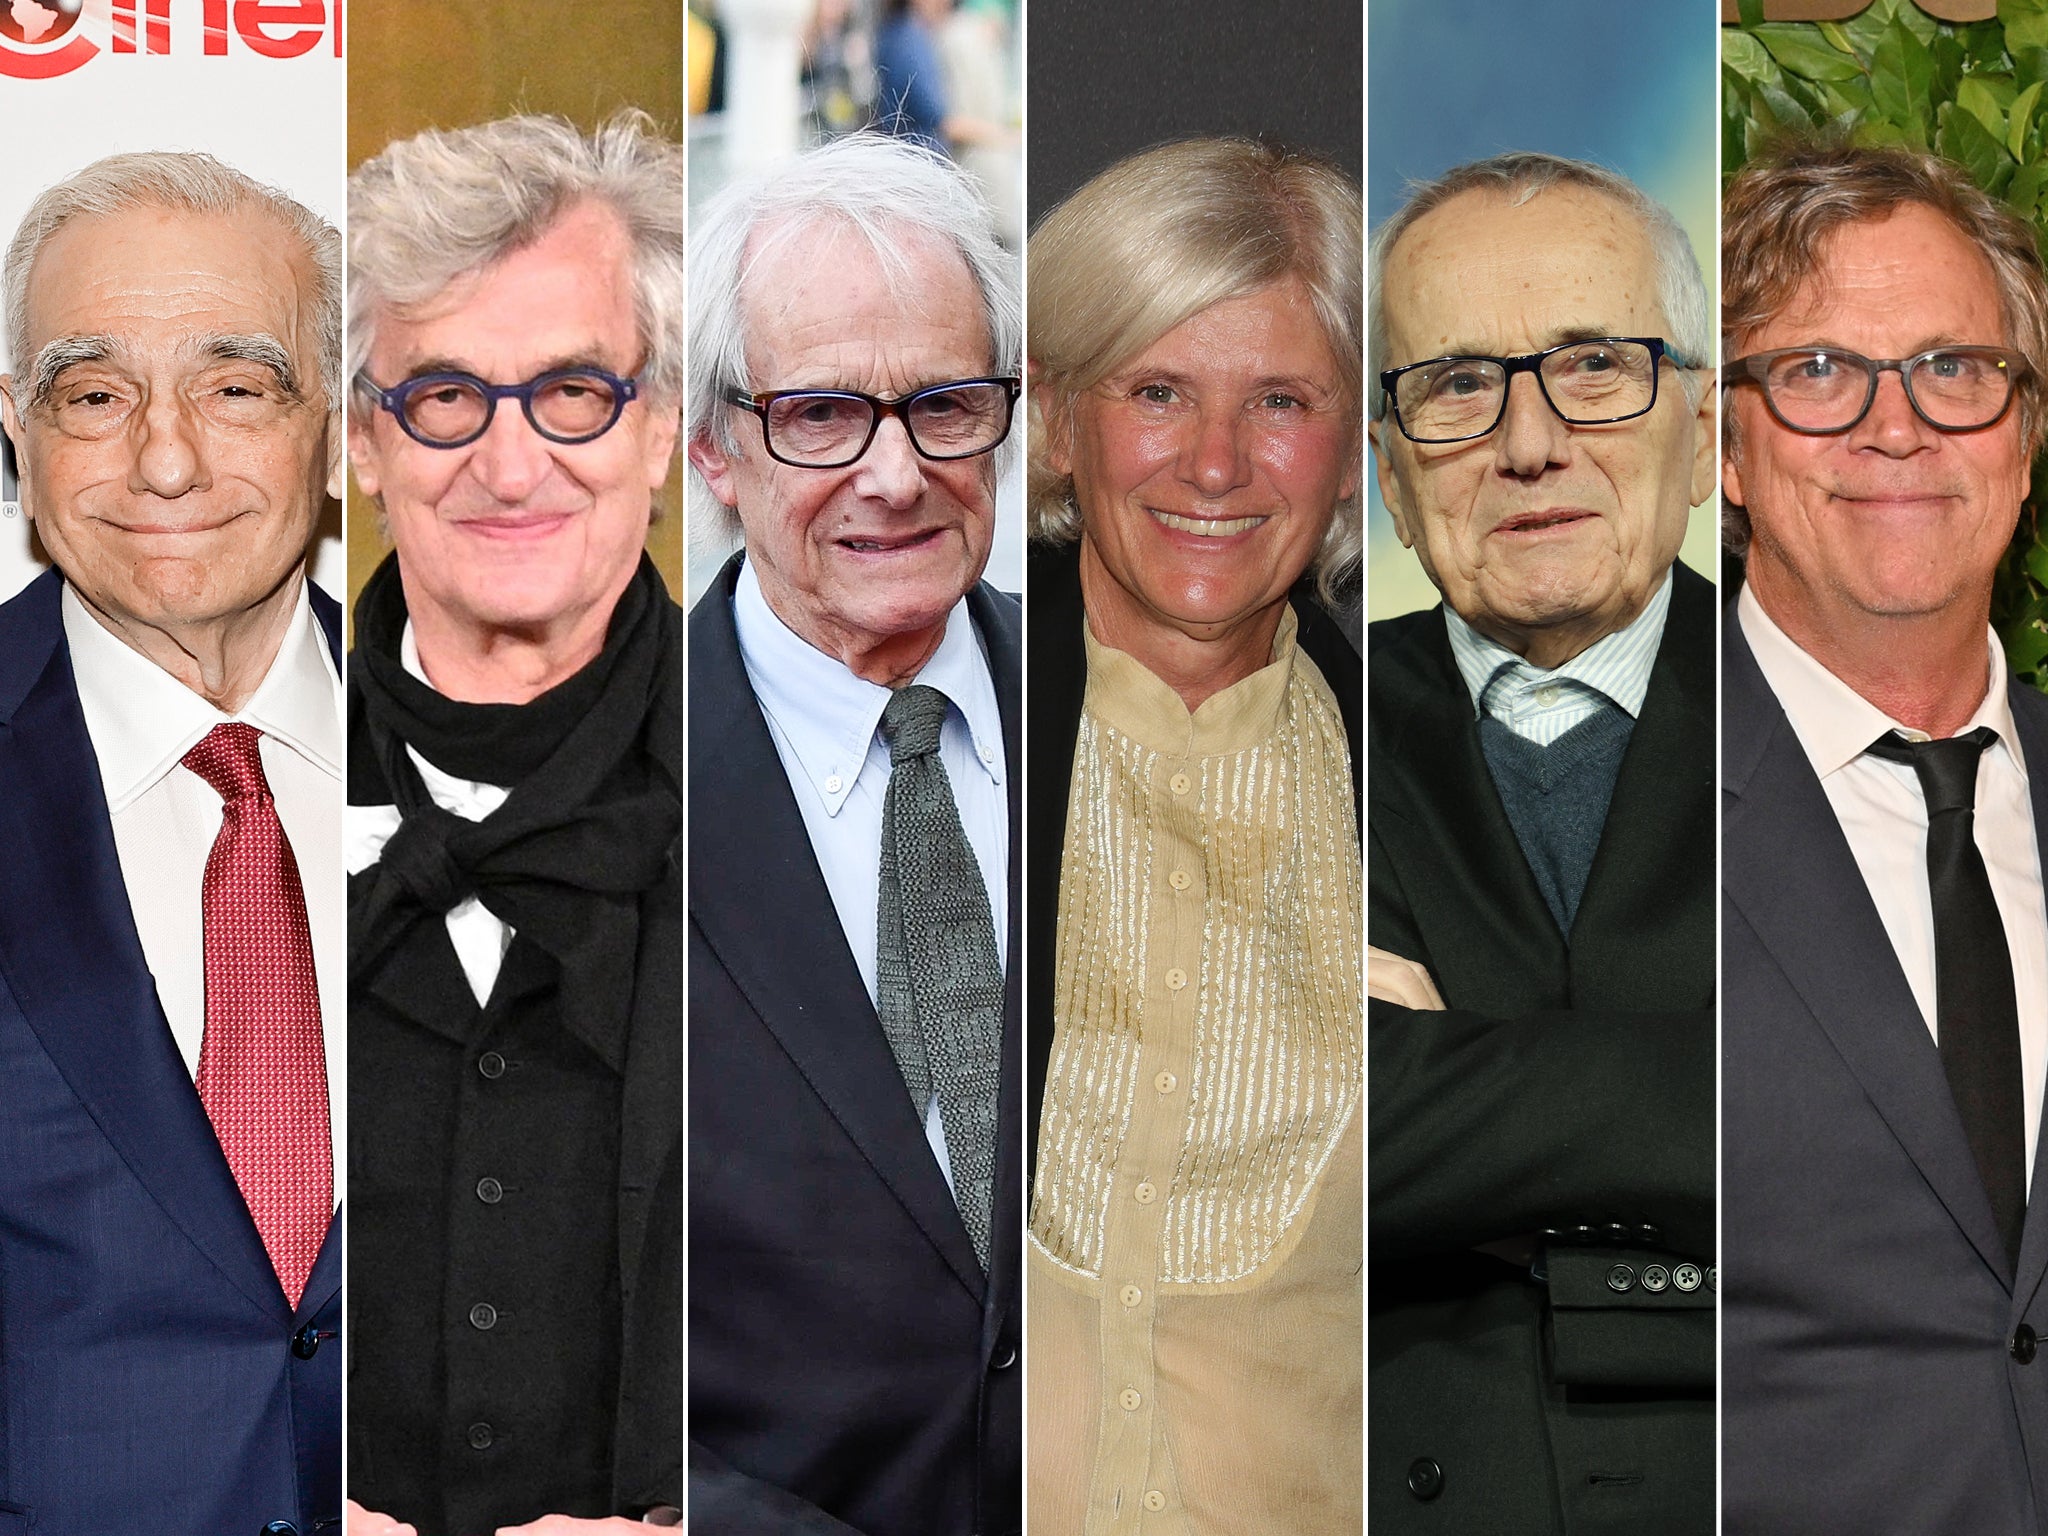 The oldies at Cannes: Martin Scorsese, Wim Wenders, Ken Loach, Catherine Breillat, Marco Bellocchio and Todd Haynes